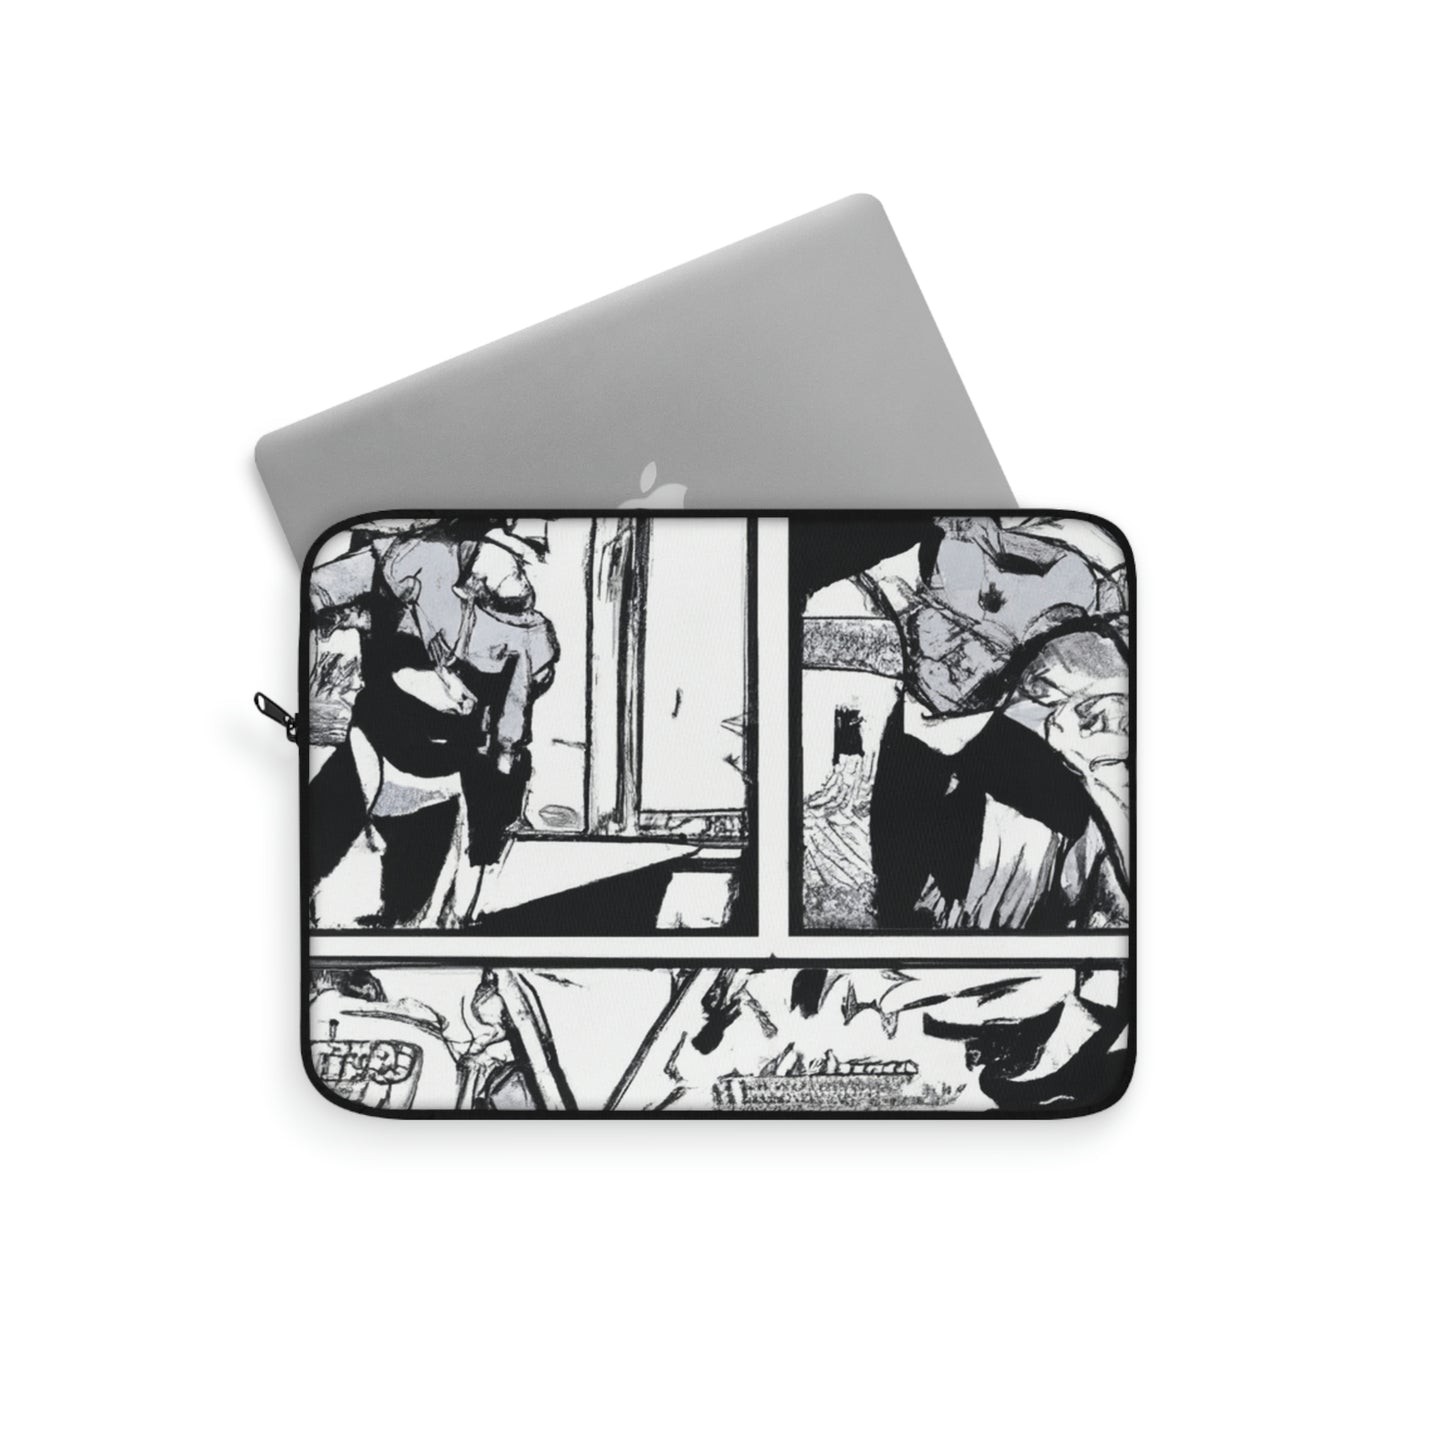 Danny the Digger - Comic Book Collector Laptop Computer Sleeve Storage Case Bag